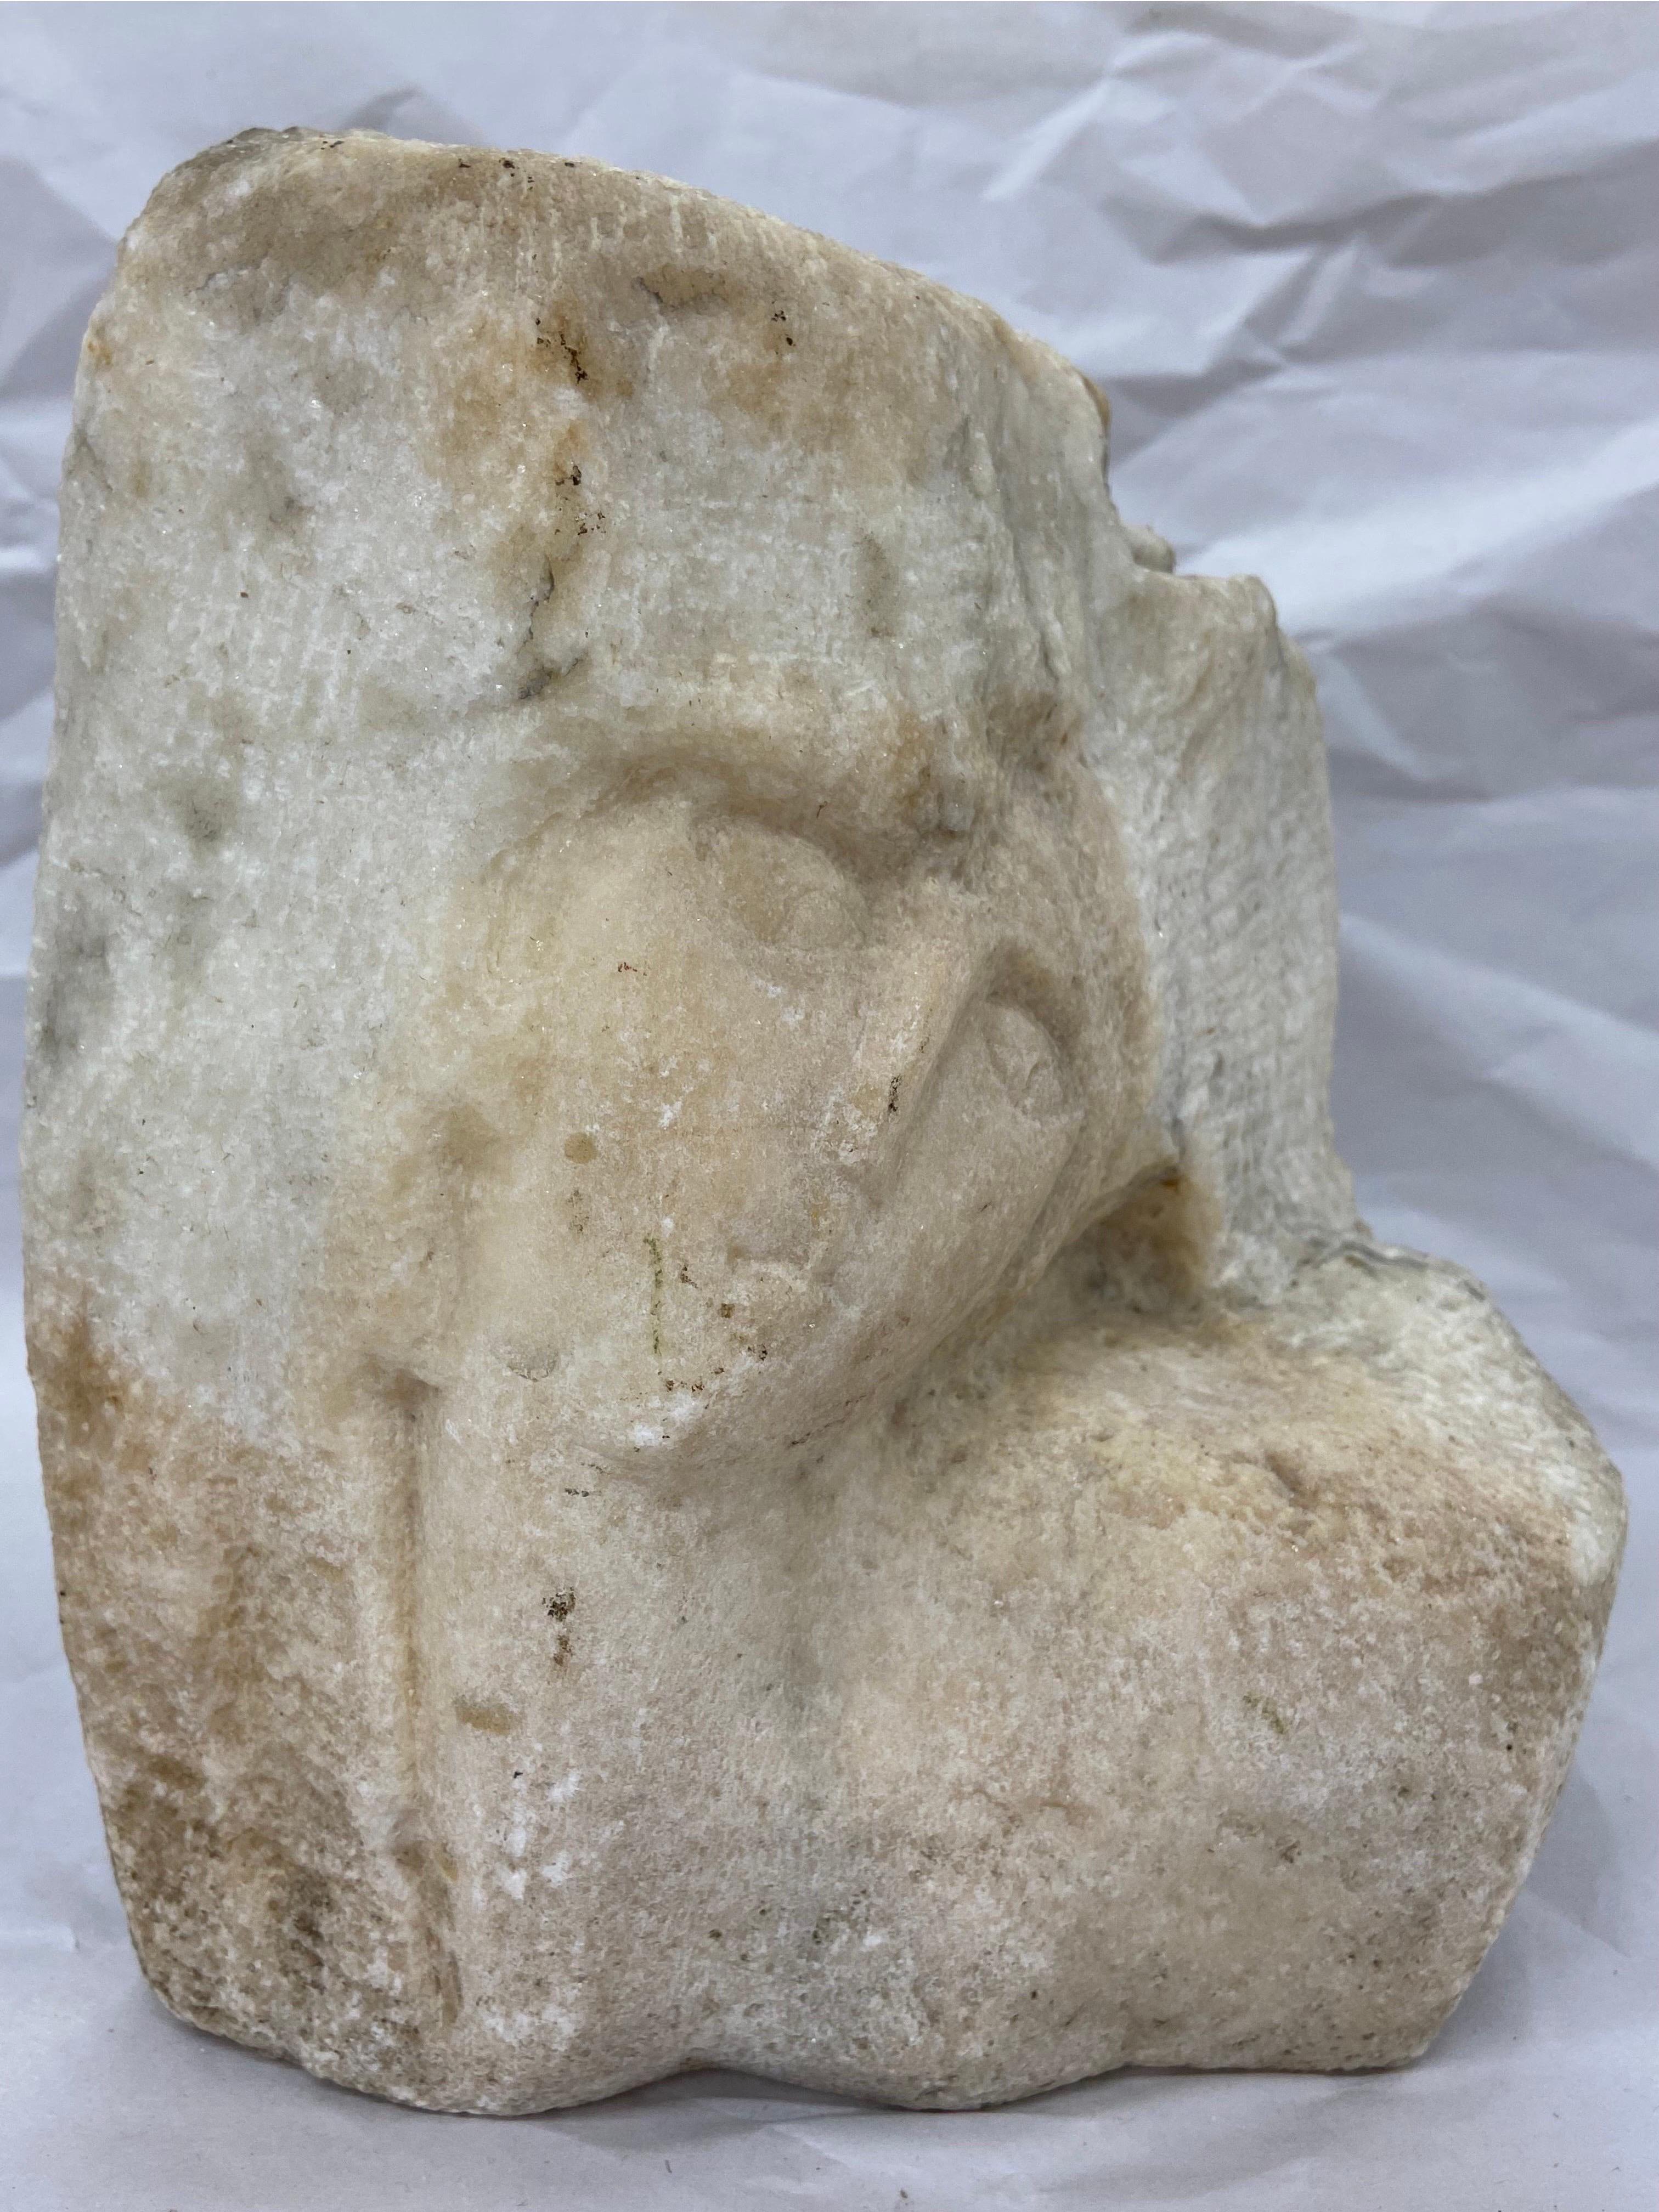 An early to mid 20th century carving of a woman's face, neck and decollete carved in stone. This sculpture is reminiscent of the modernist masterworks of the 1930's from both Europe and America. The face is shown from the front with the sitter's